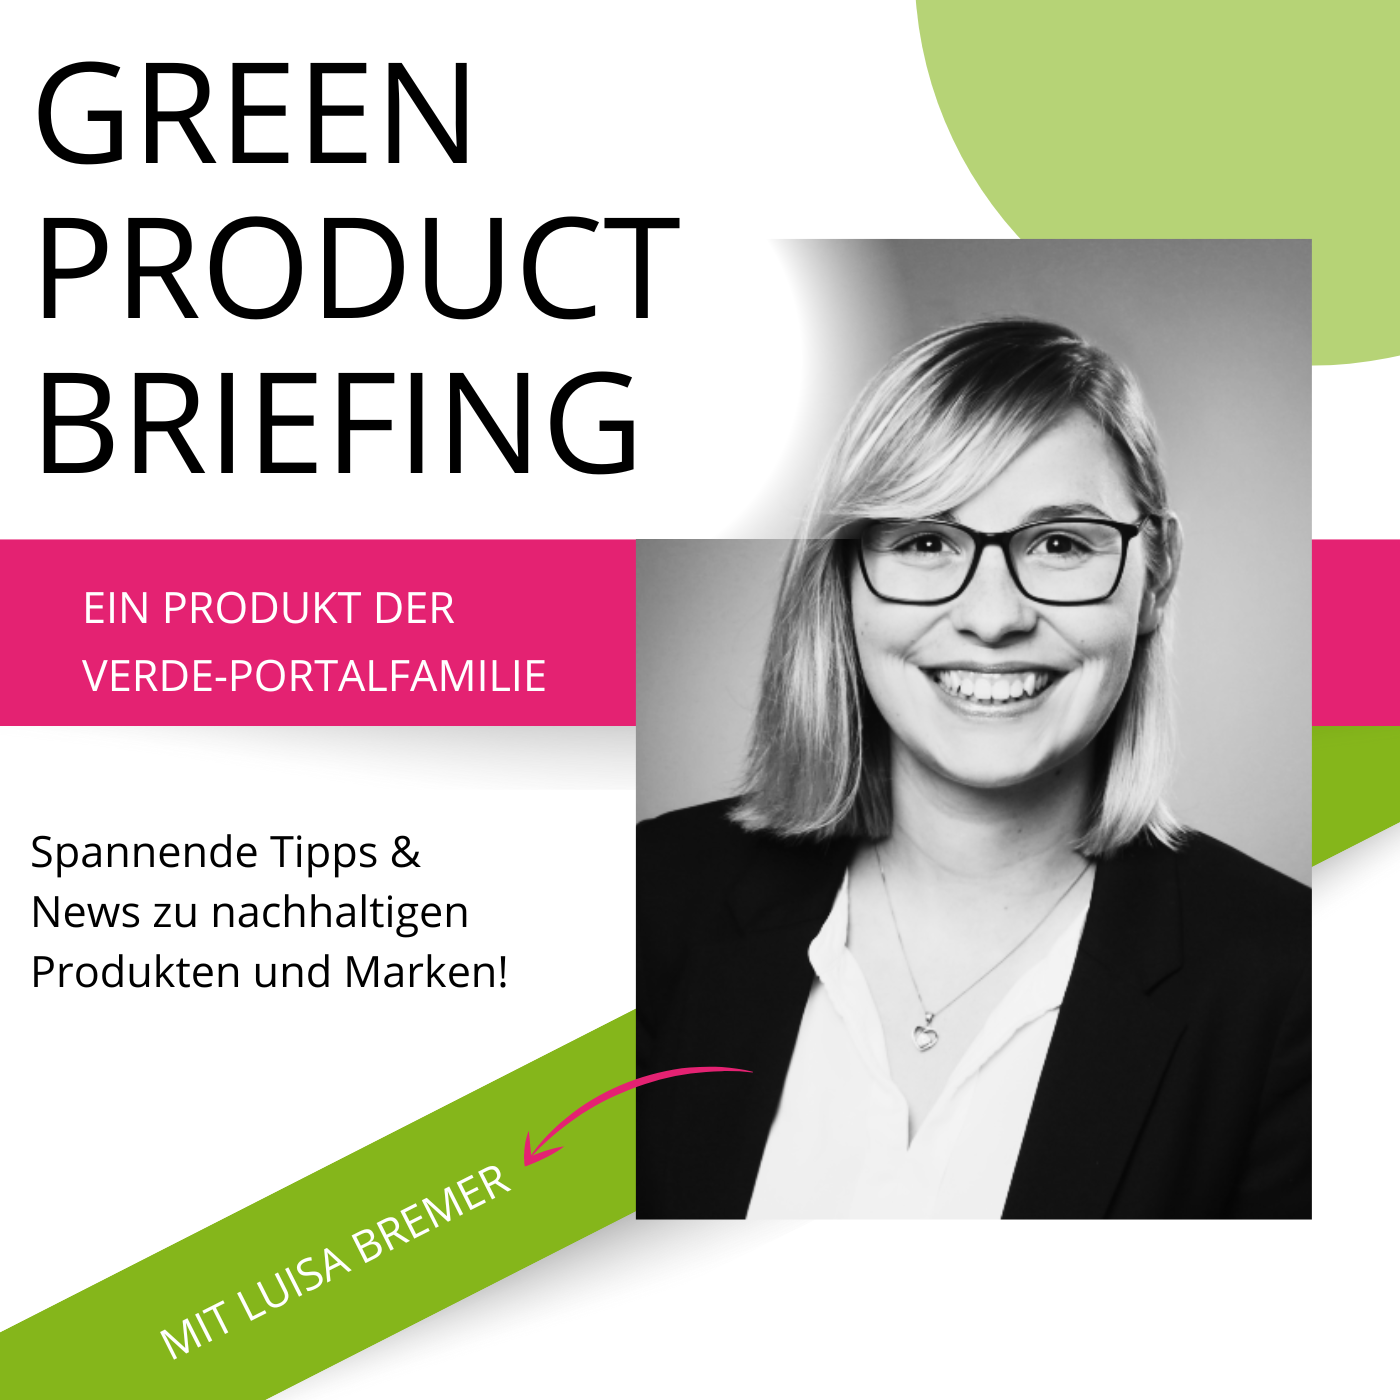 GREEN PRODUCT BRIEFING